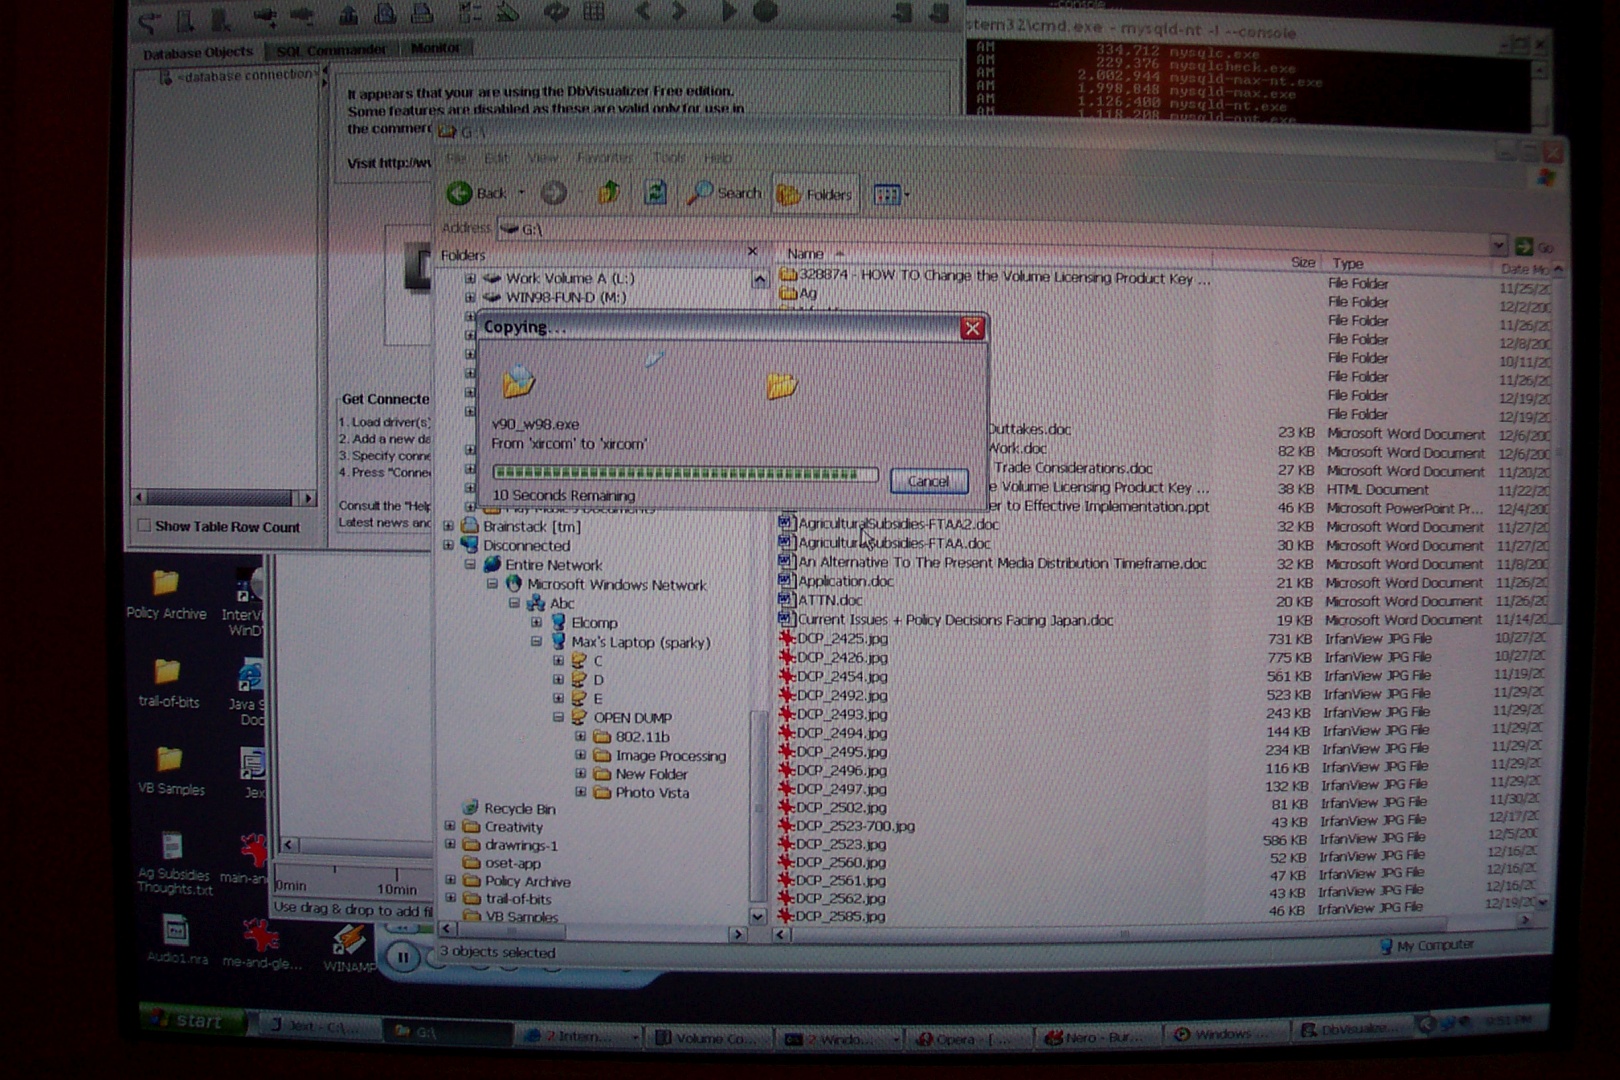 A screenshot of Windows Explorer on Windows XP copying files from a laptop